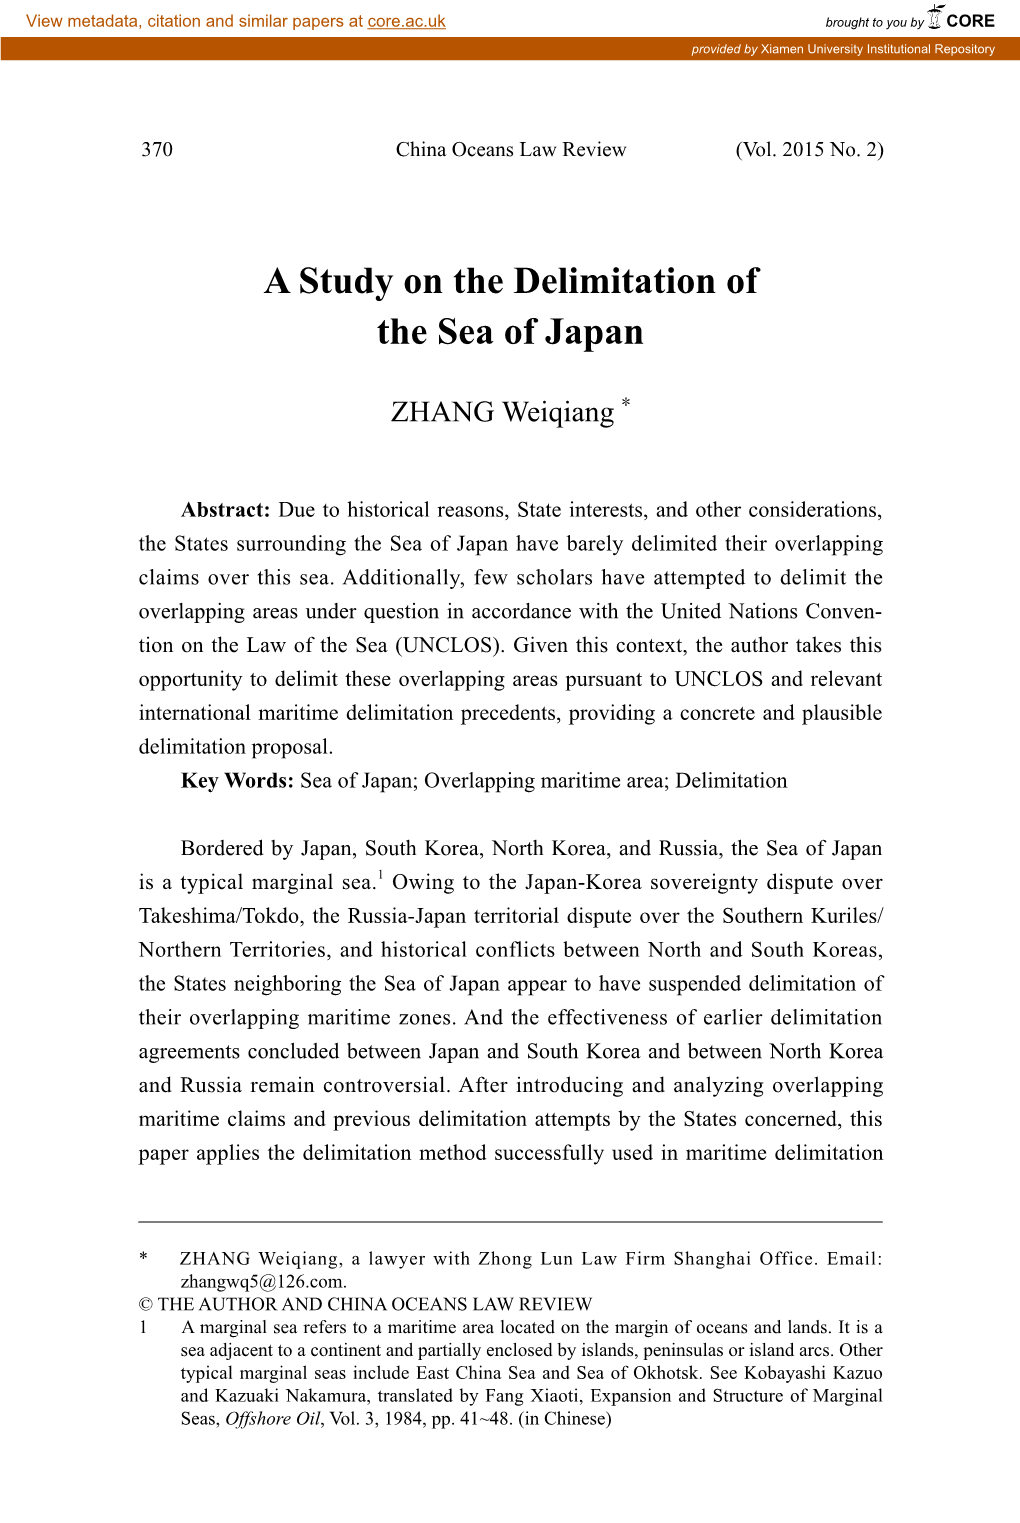 A Study on the Delimitation of the Sea of Japan